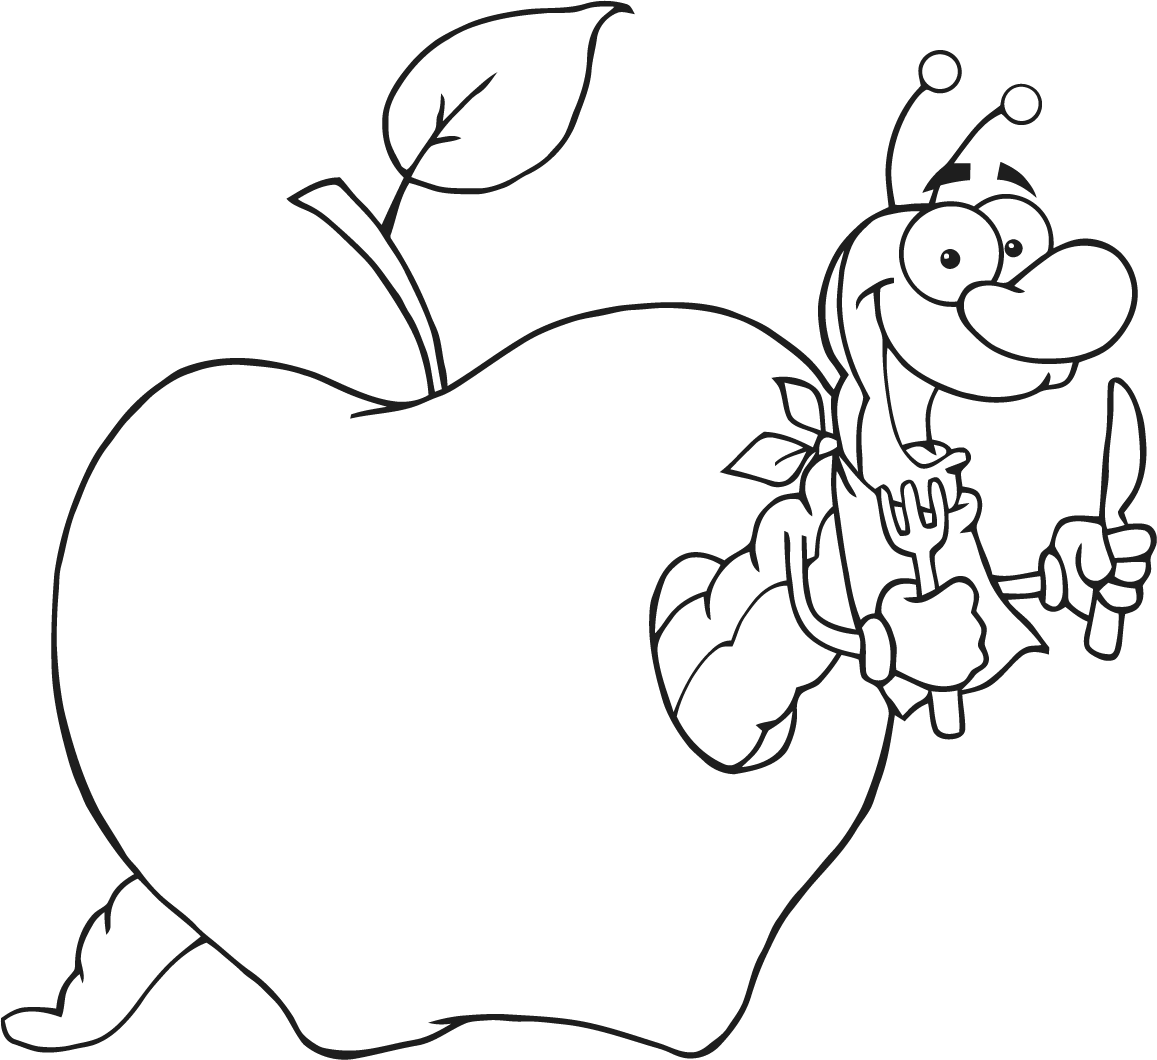 Apple Worm Coloring Page - Reinanco